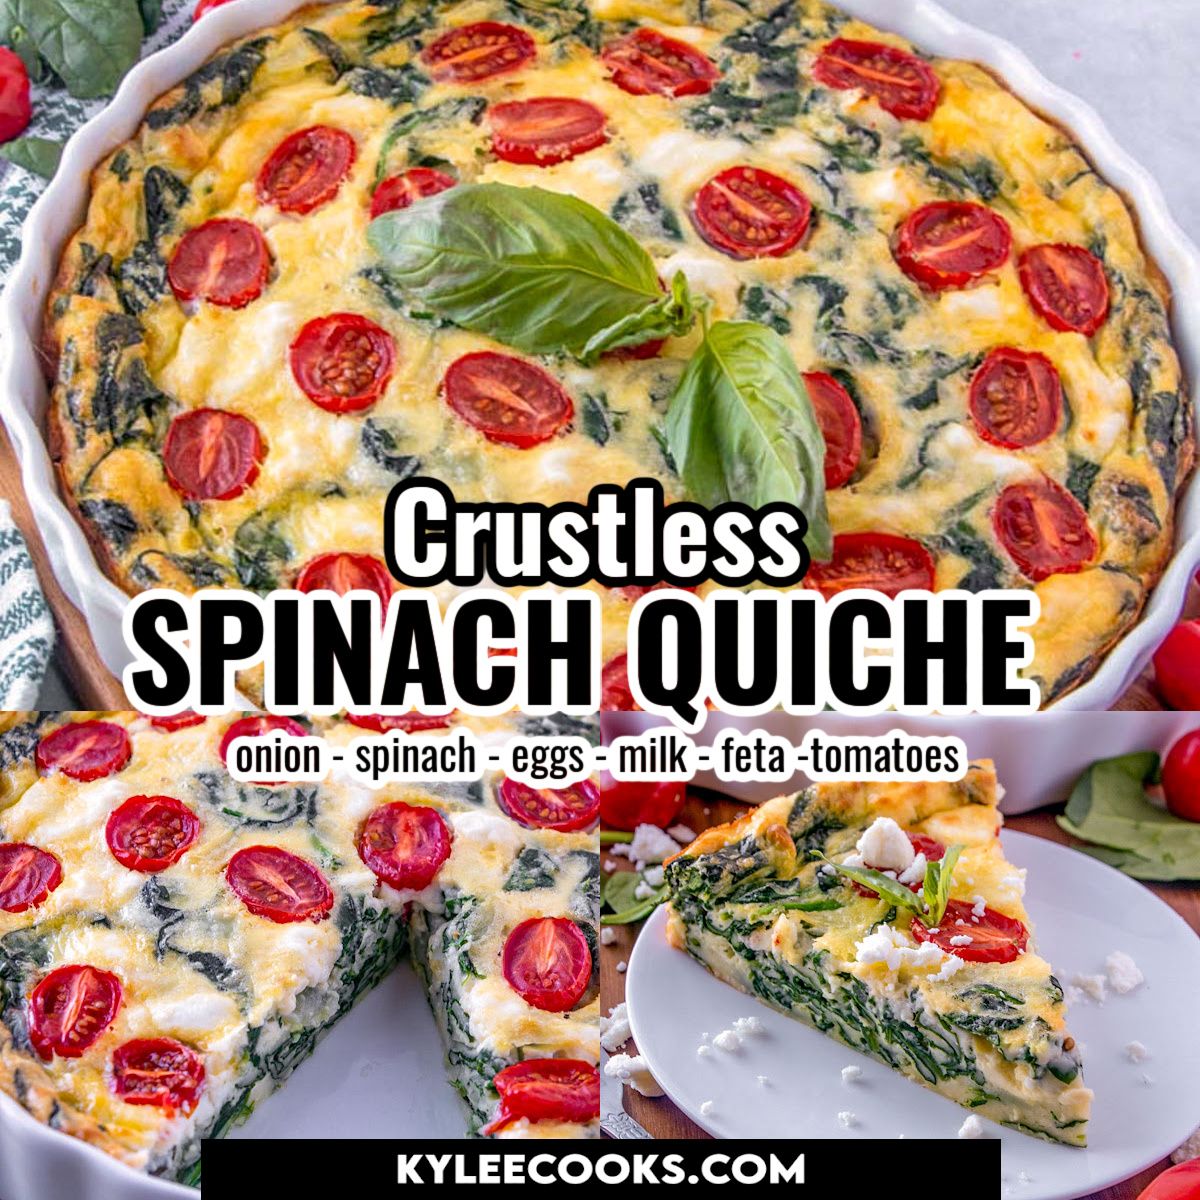 Spinach is the star of the show in this healthy crustless spinach quiche with tomatoes, onions and feta. Delicious warm, room temp, or chilled – this is a versatile and nutritious dish!  #lowcarb #healthy #crustlessquiche #kyleecooks kyleecooks.com/spinach-tomato…